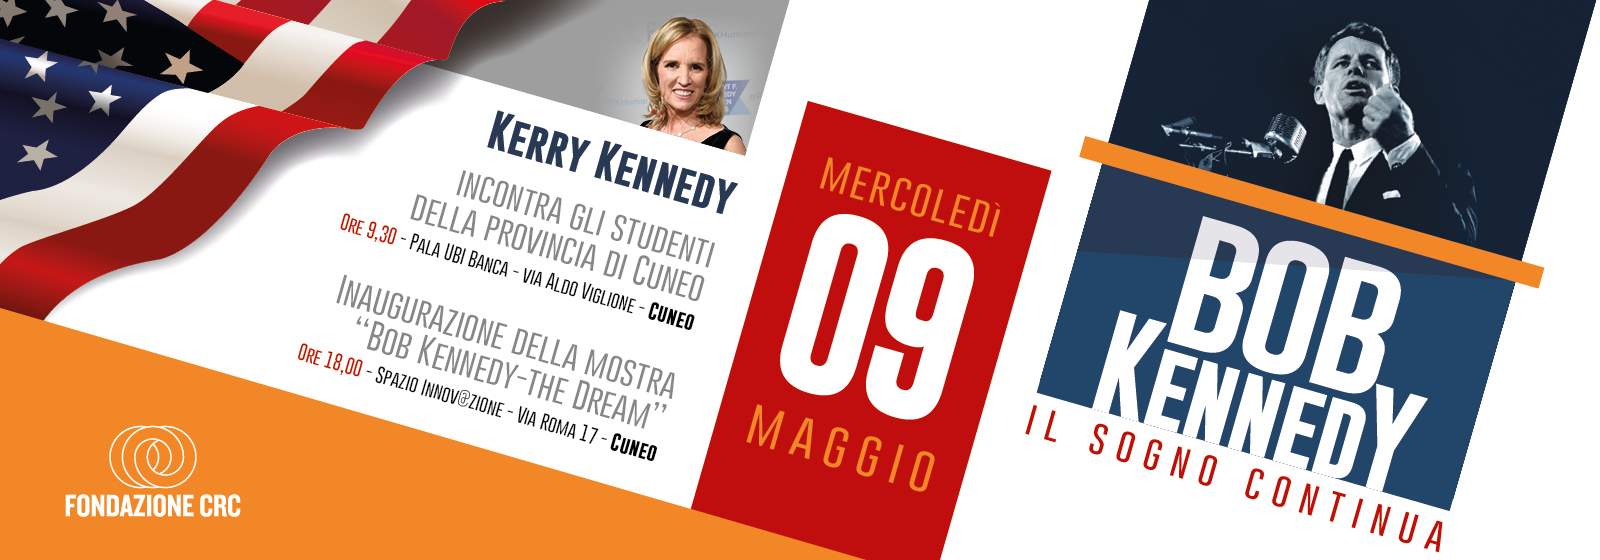 An exhibition in Cuneo traces the life of Bob Kennedy